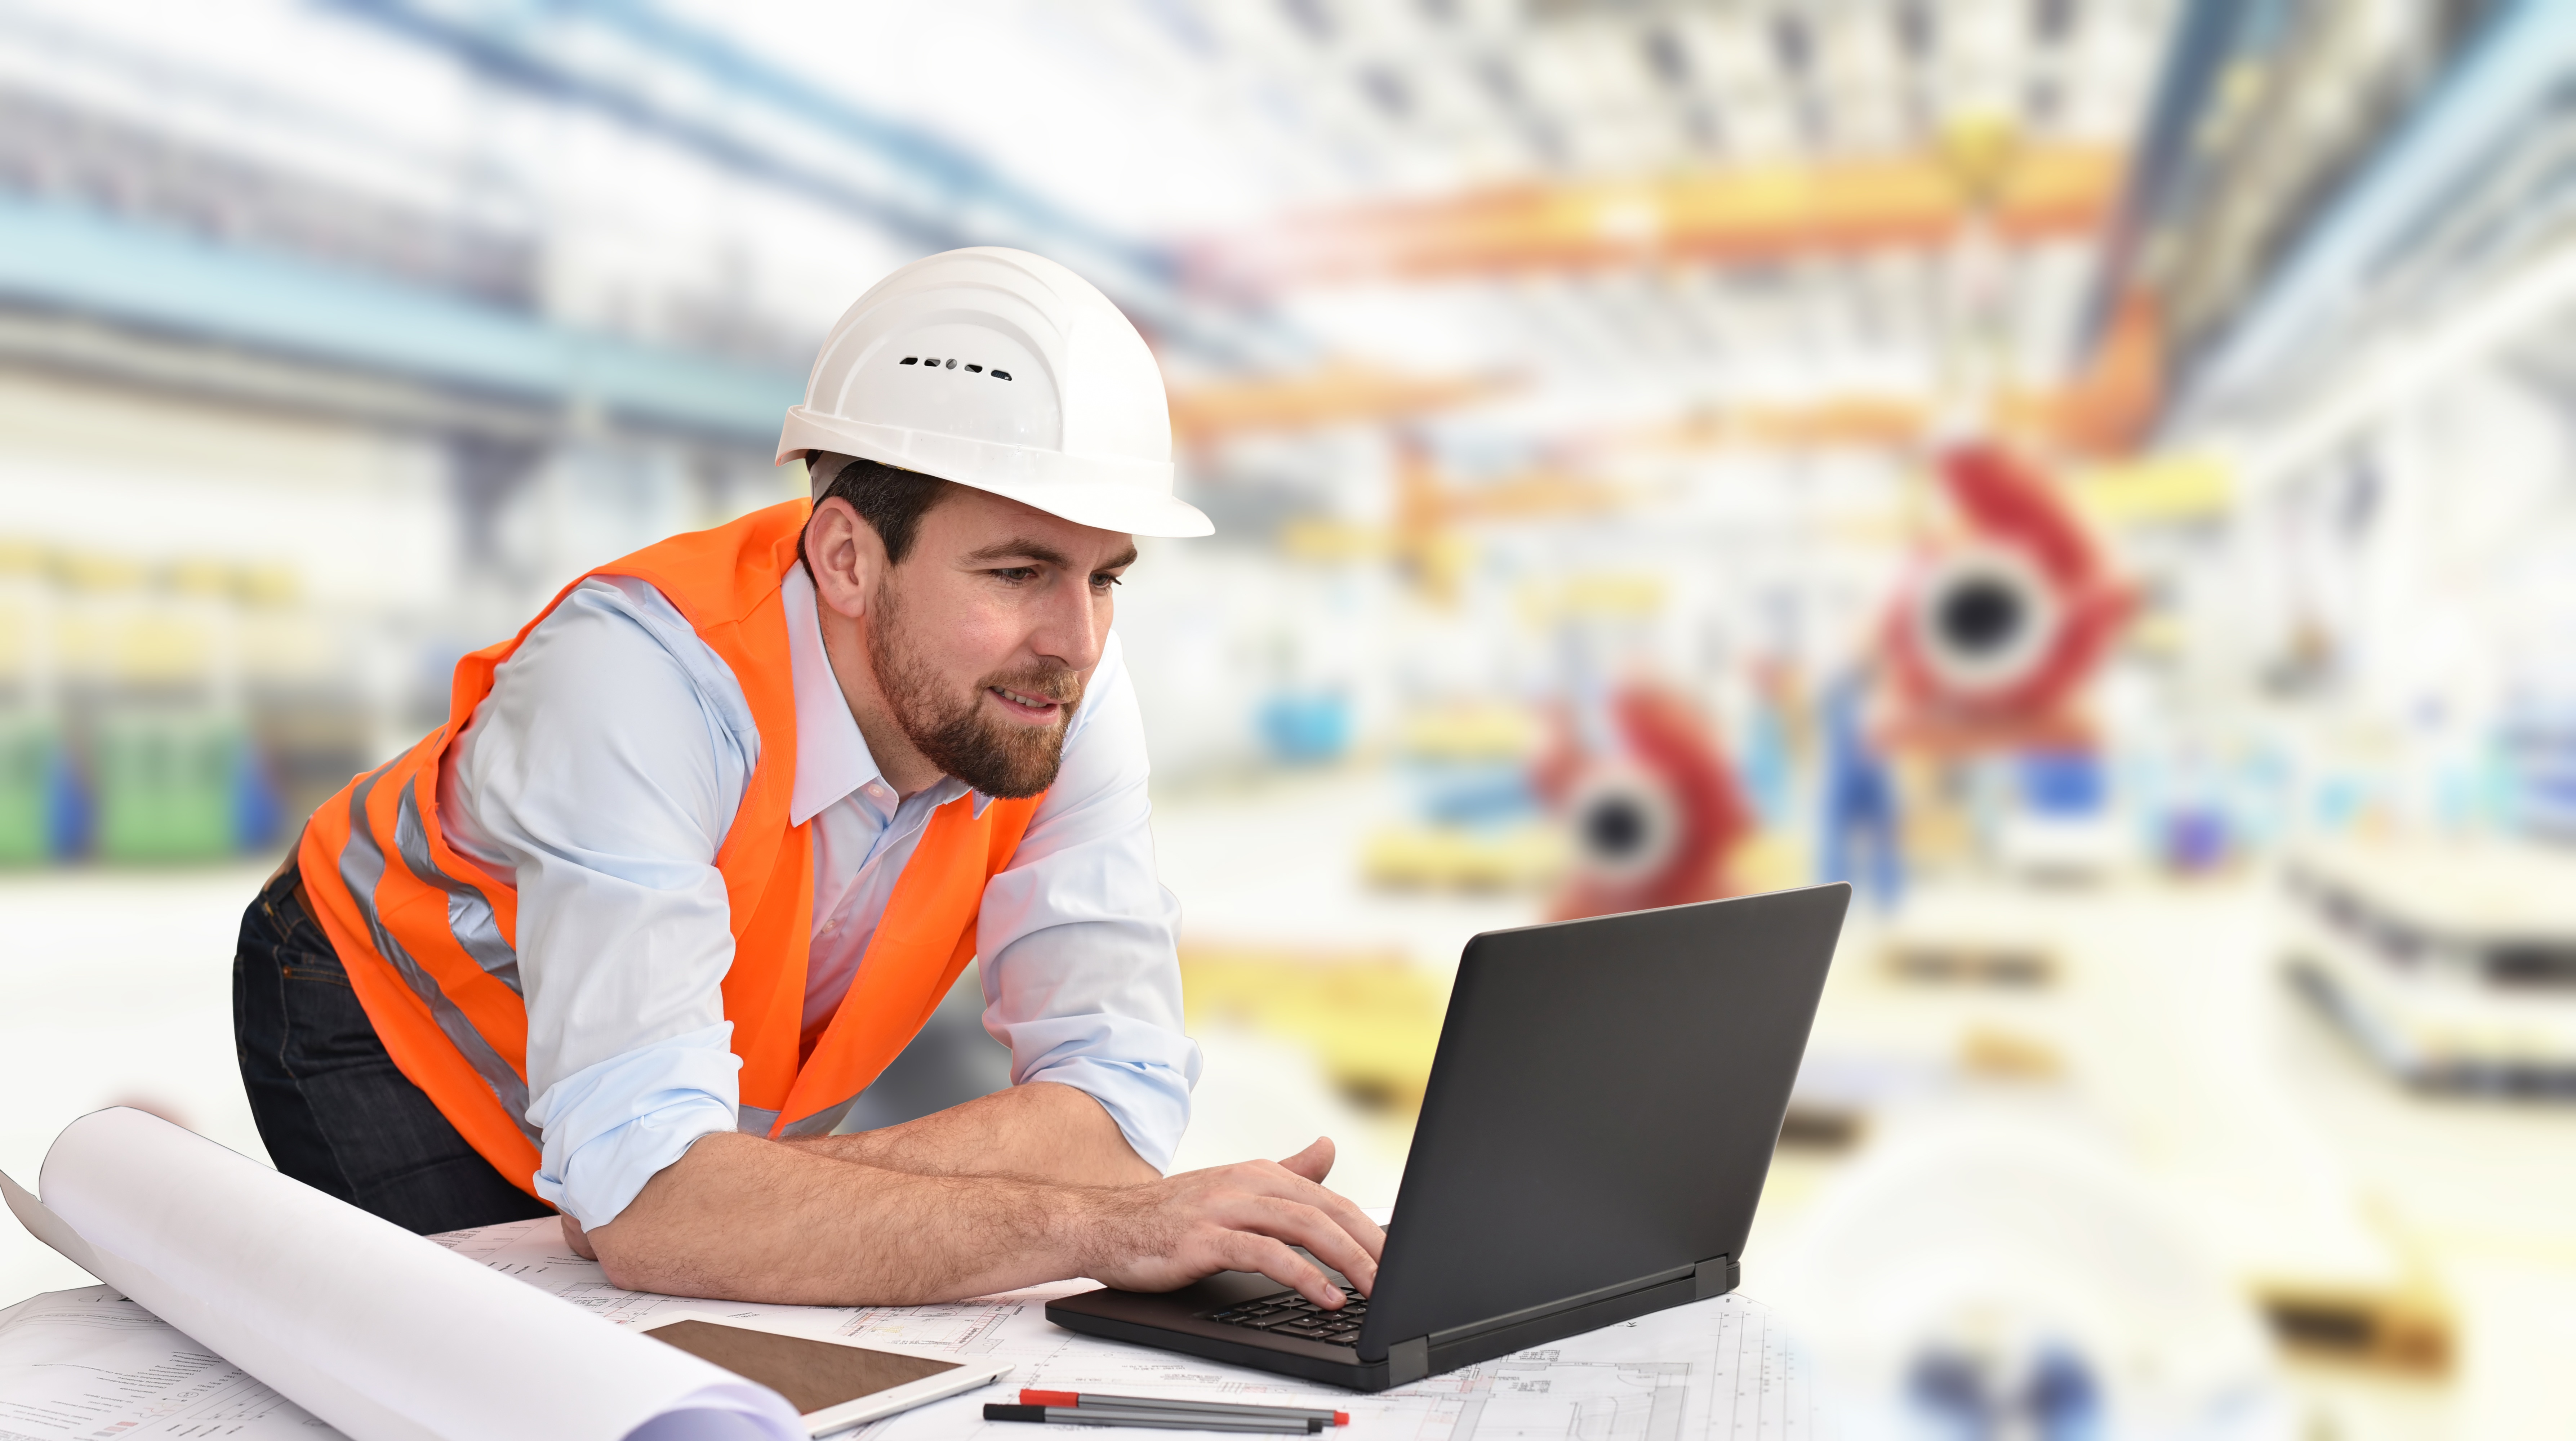 construction worker viewing online training course on laptop